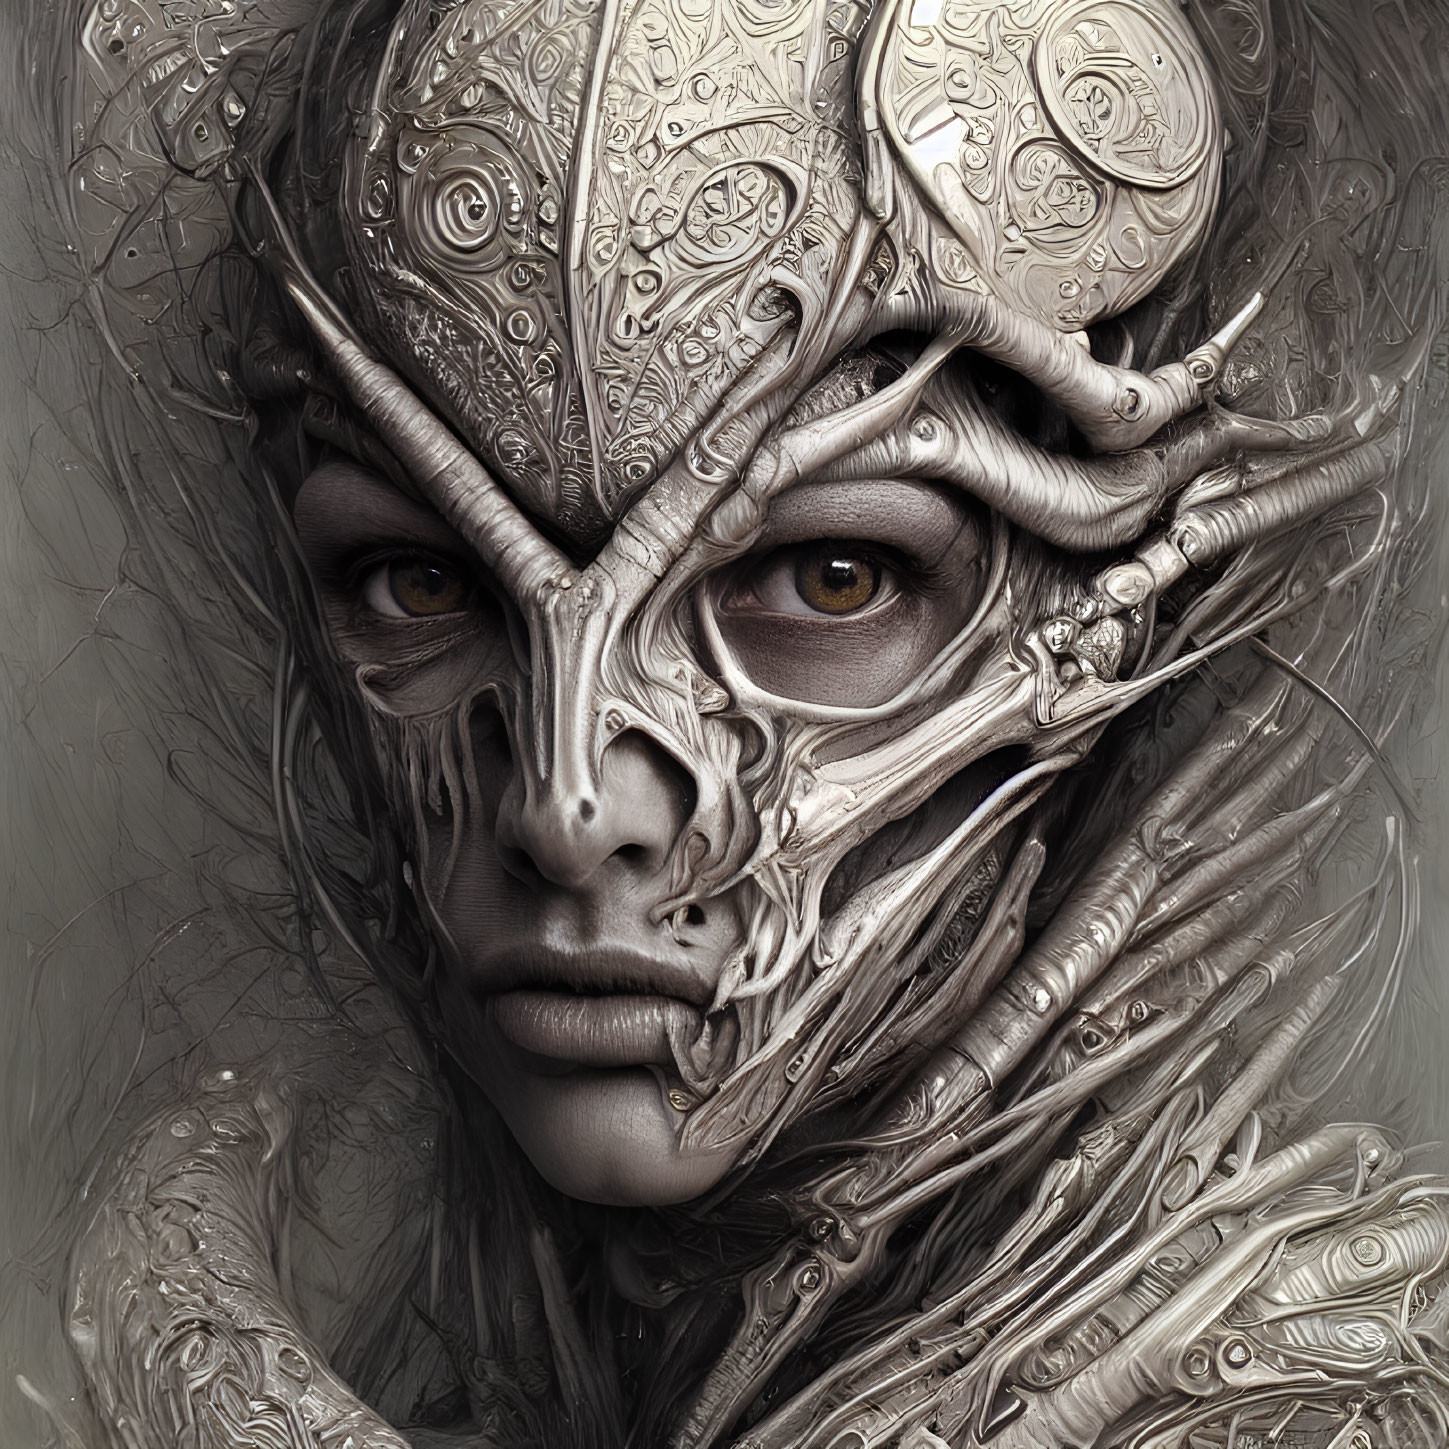 Detailed Silver Alien-Like Mask with Ornate Patterns